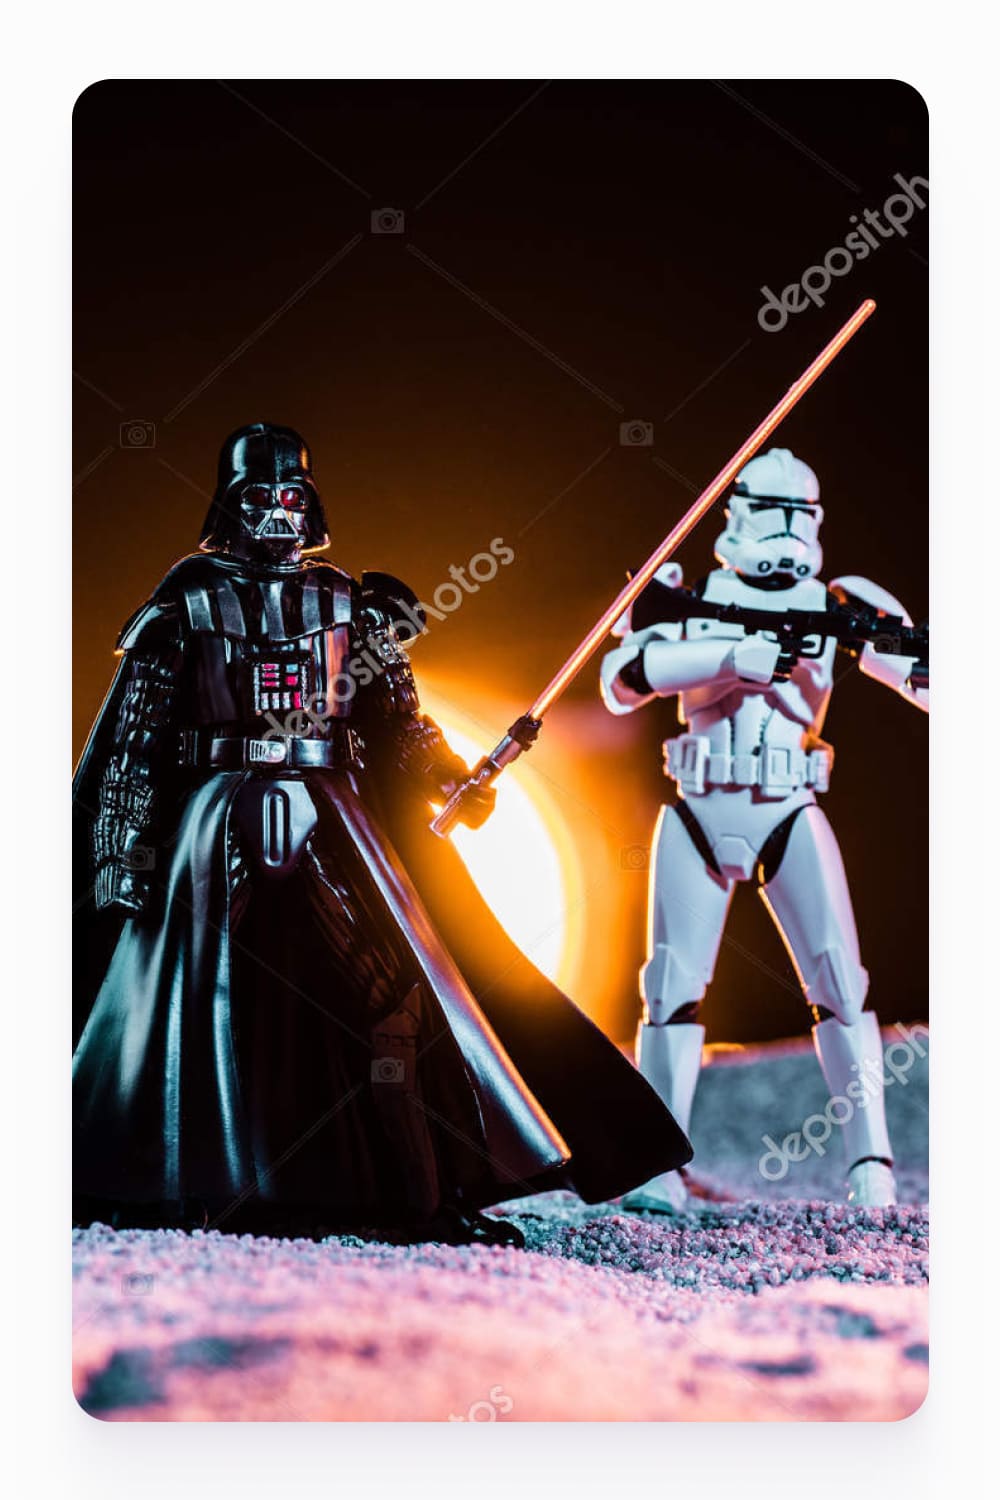 White imperial stormtroopers with guns and Darth Vader with lightsaber on black background with sun.